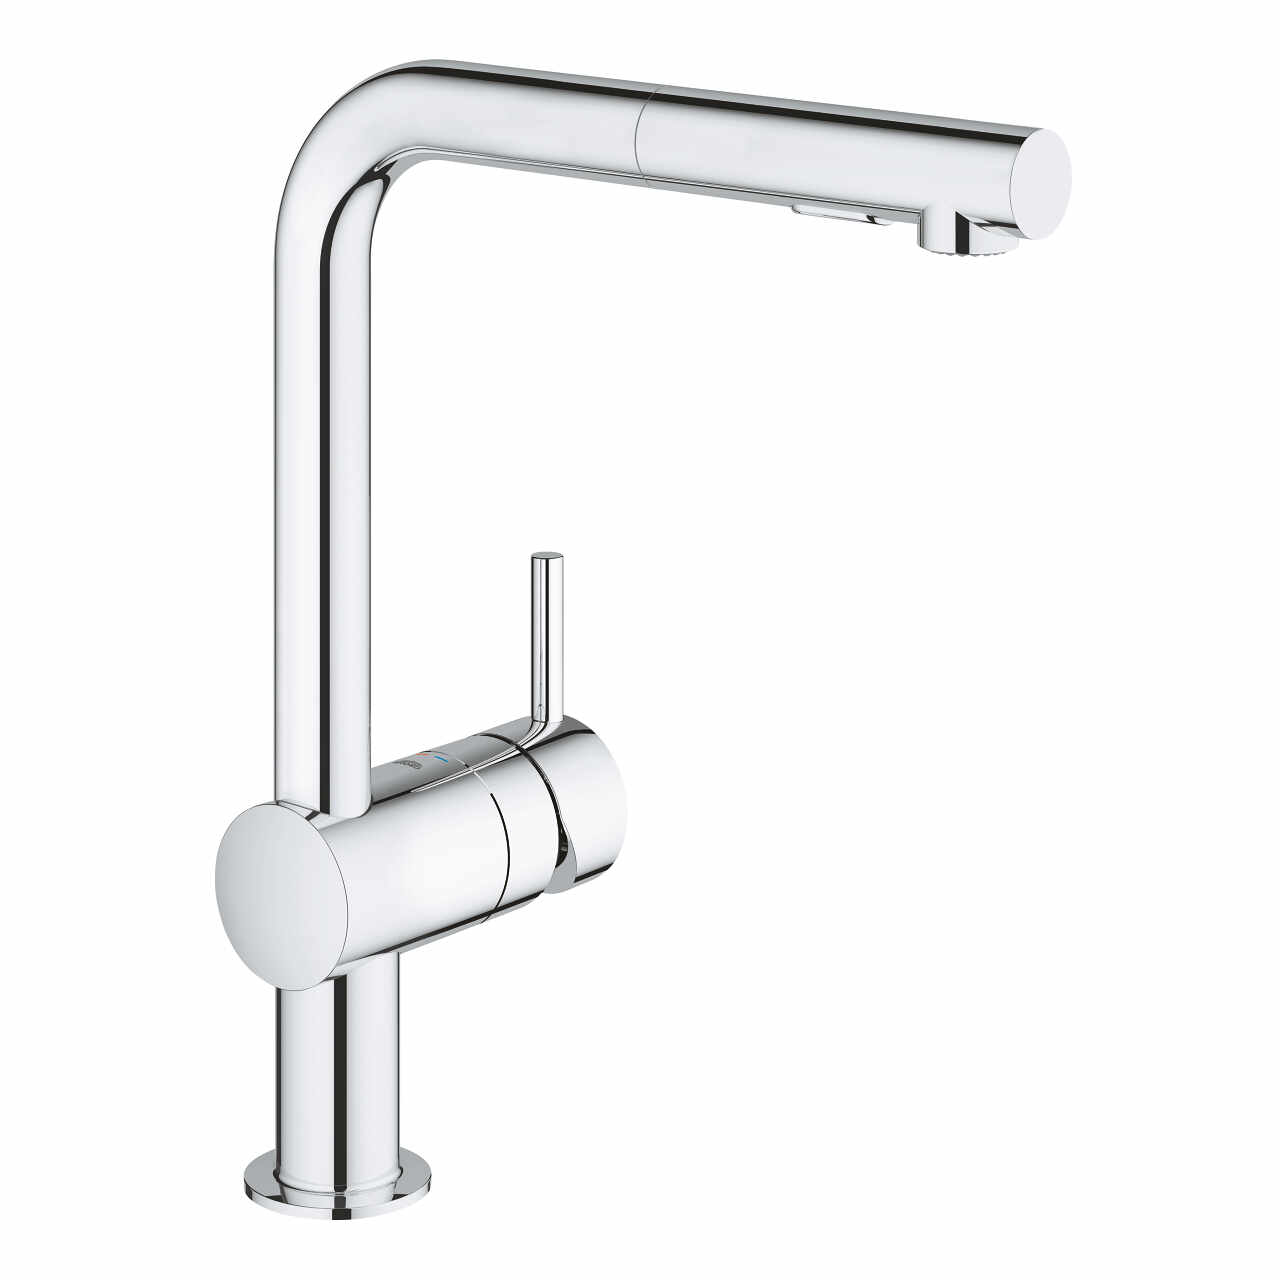 Baterie bucatarie Grohe Minta cu dus extractibil dual spray pipa L levier scurt crom